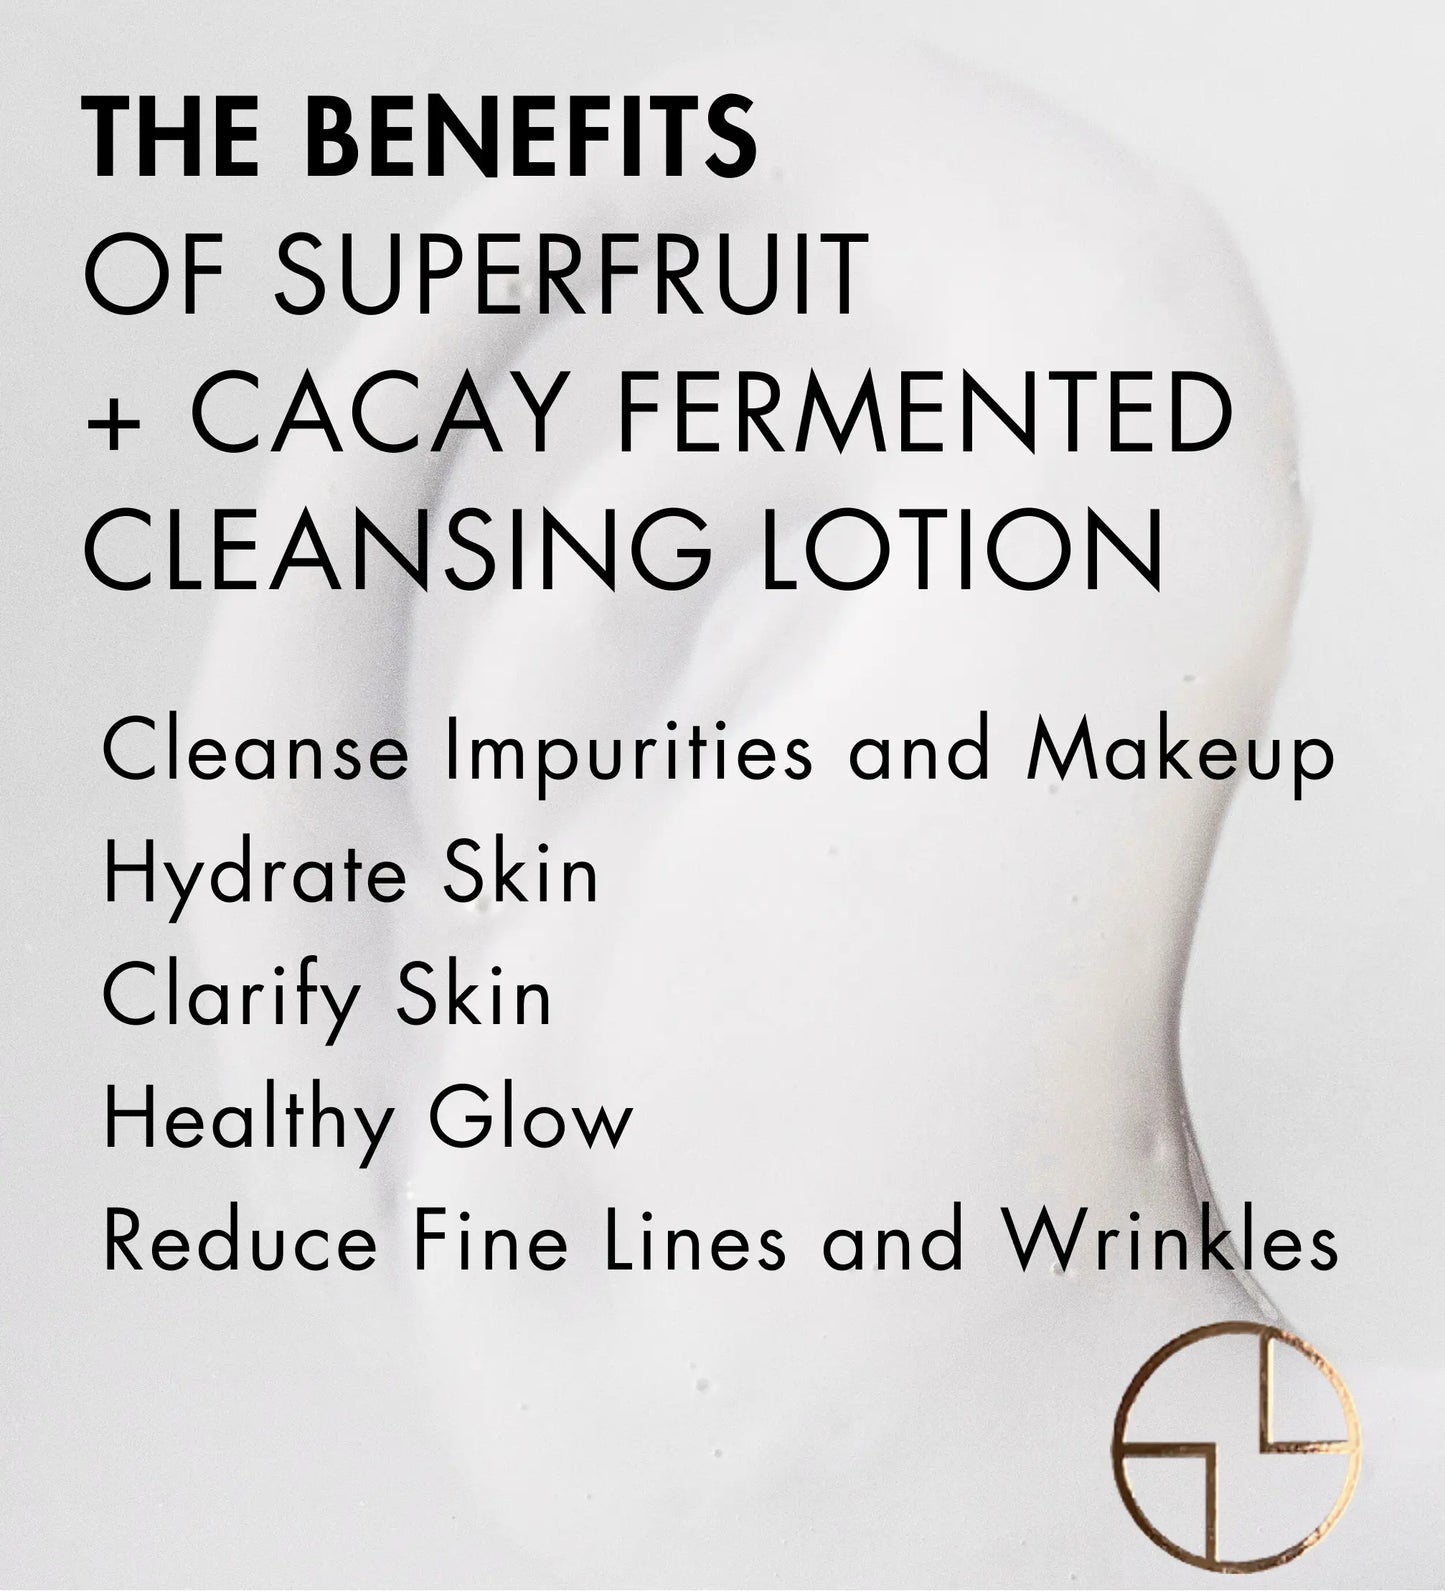 CACAYE SUPERFRUIT + CACAY FERMENTED CLEANSING LOTION BENEFITS